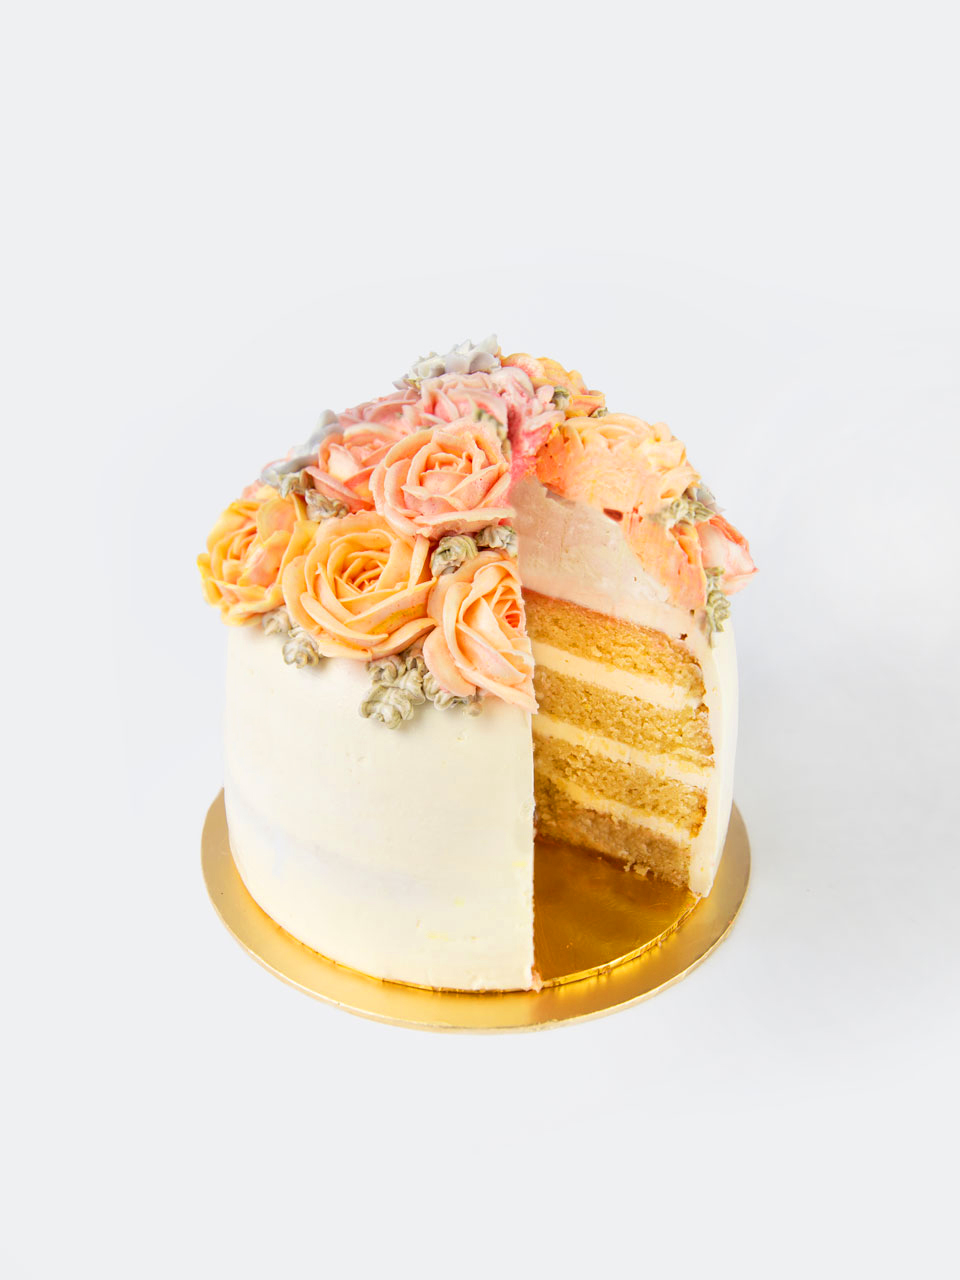 Delectable Cake - Online cake delivery Malaysia